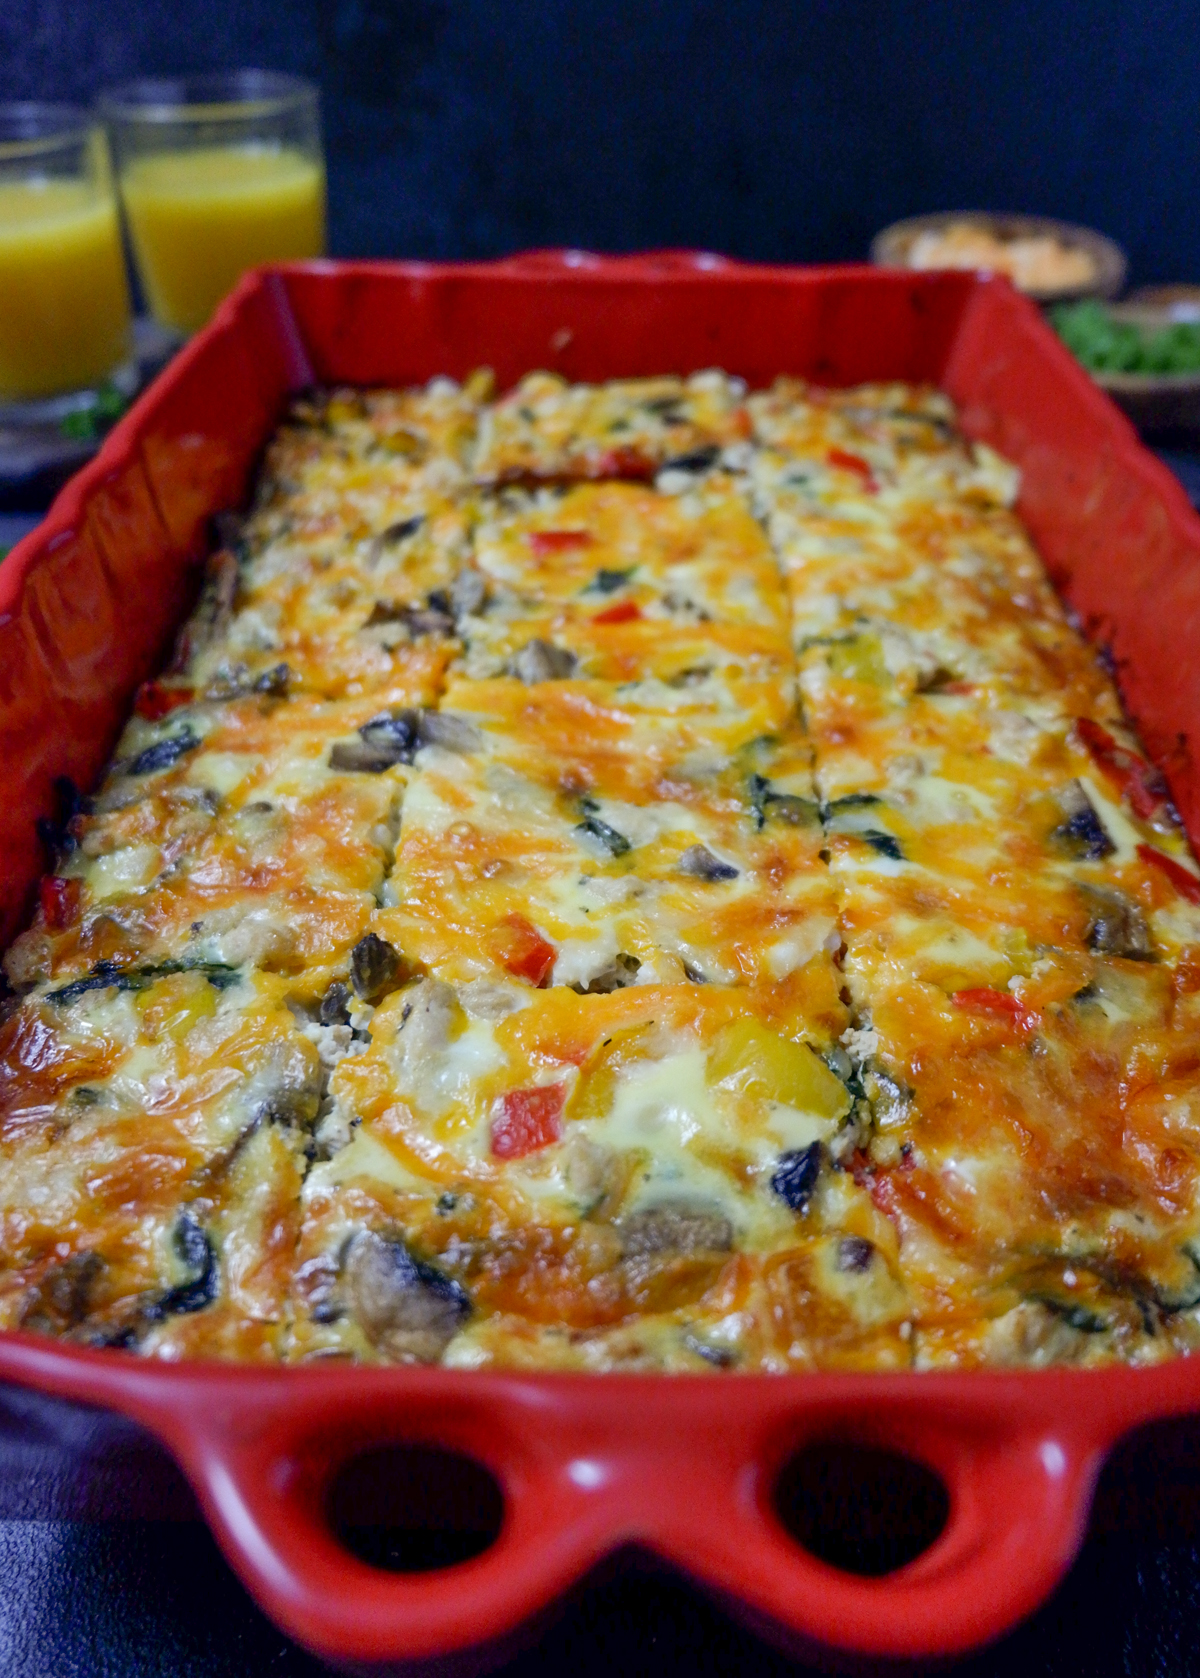 chicken breakfast casserole in a red casserole dish looking from one end to the other portrait style. 2 glasses of oj in the back top left, shredded cheese and parsley in wooden bowls in the top right back